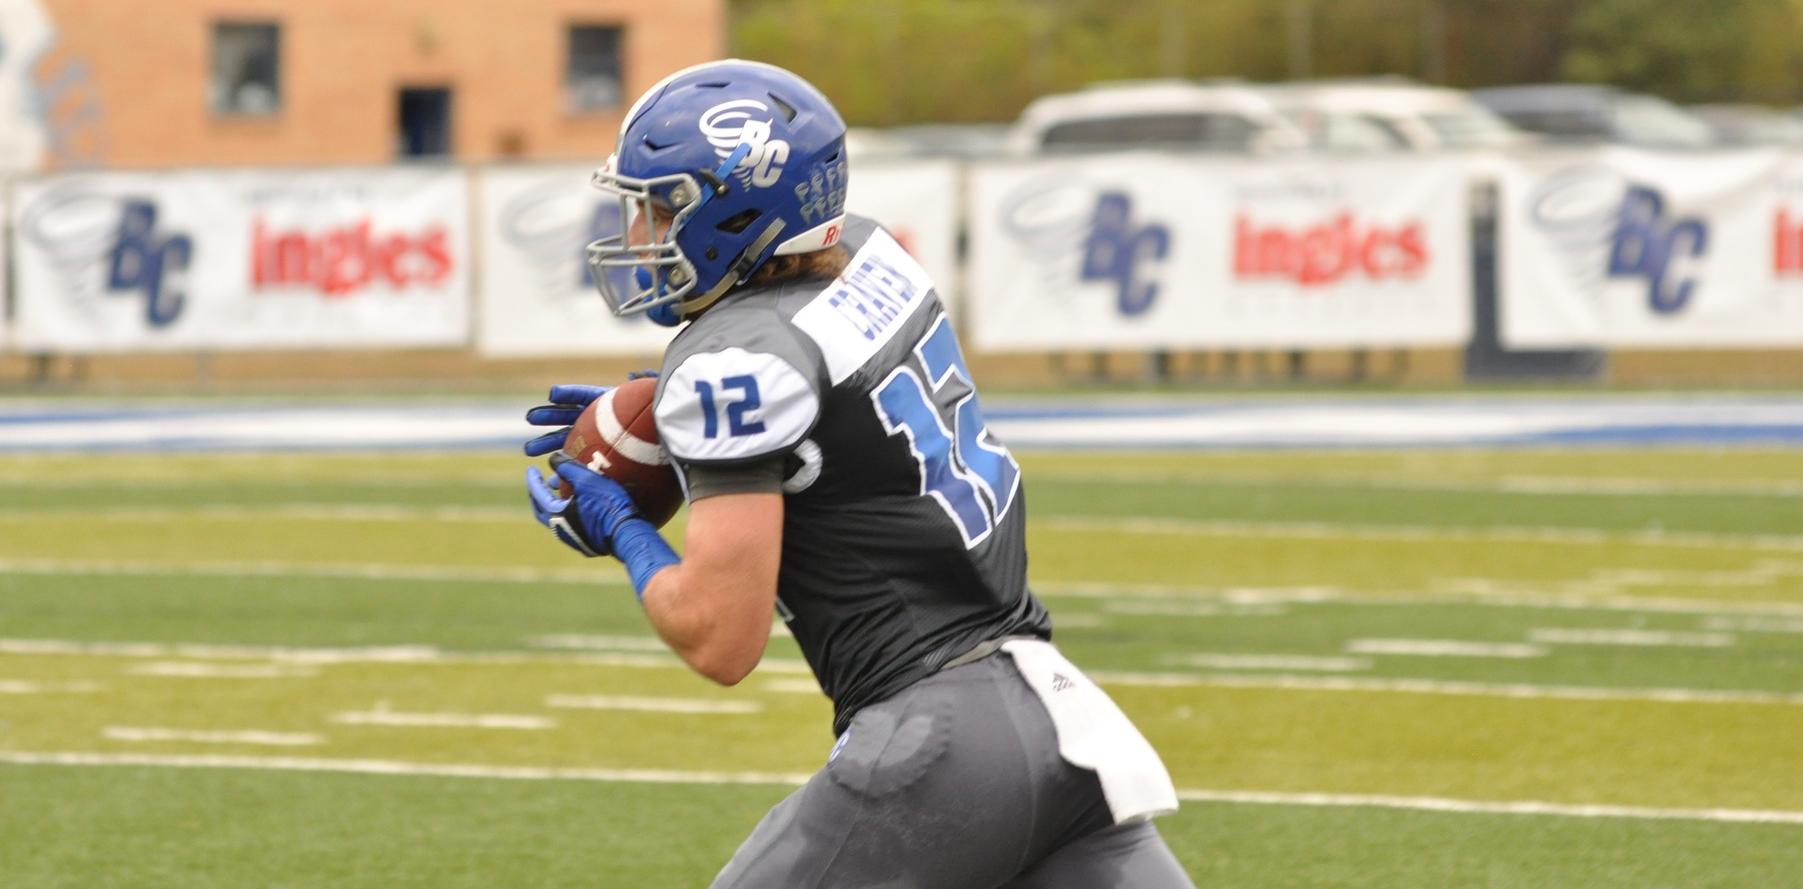 Craven Leads Tornados to 41-17 Win Over Methodist